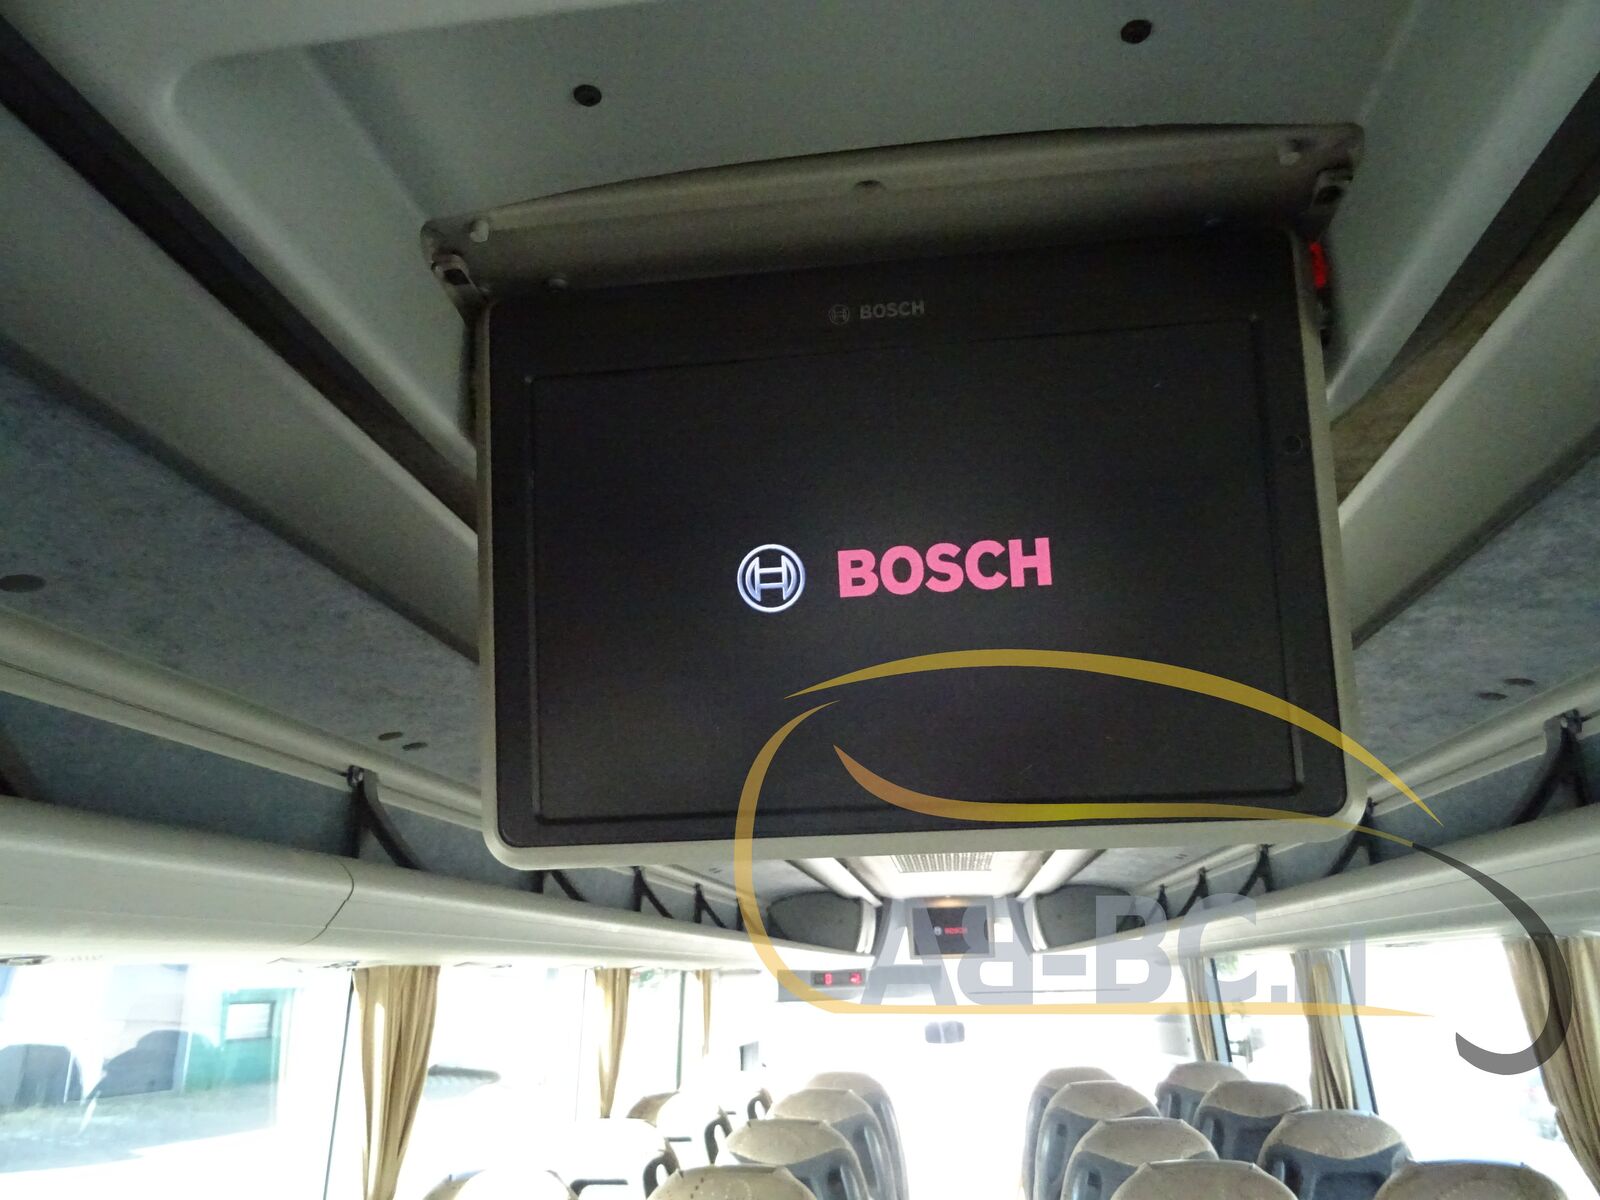 coach-bus-IVECO-Irisbus-Evadys-HD-56-Seats-EURO-5-12-METER---1659945067307403524_orig_d52bcc98bfd8526336d68fdceb77f0e6--22080810475874478100